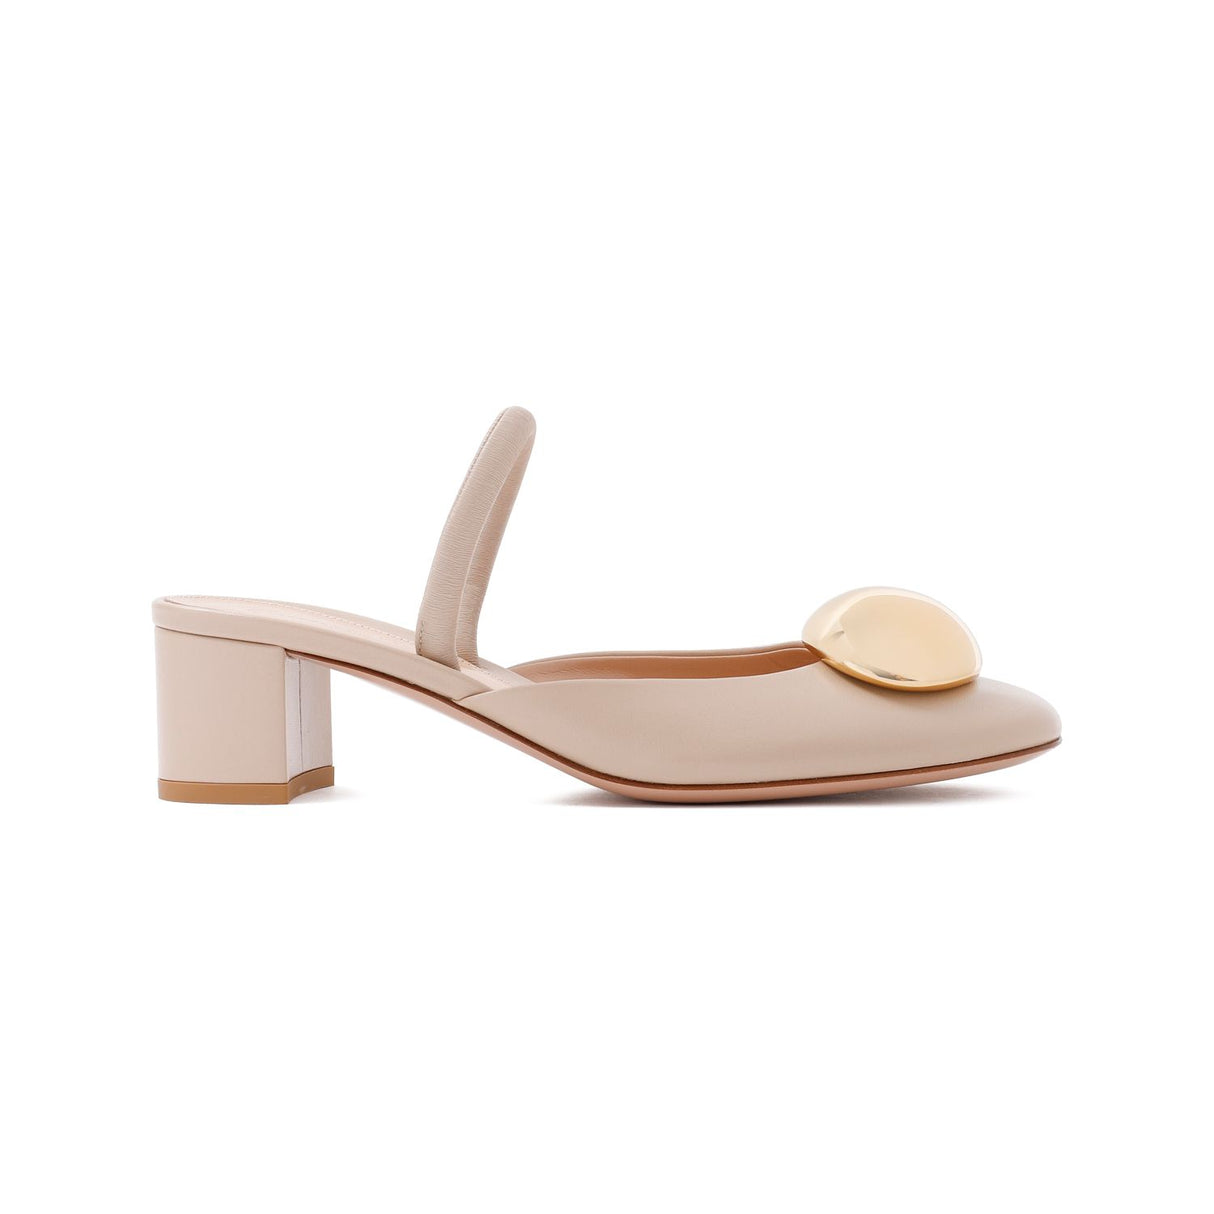 GIANVITO ROSSI Slingback Pumps in Nude Nappa Leather with 4.5cm Heel Height for Women - SS24 Collection